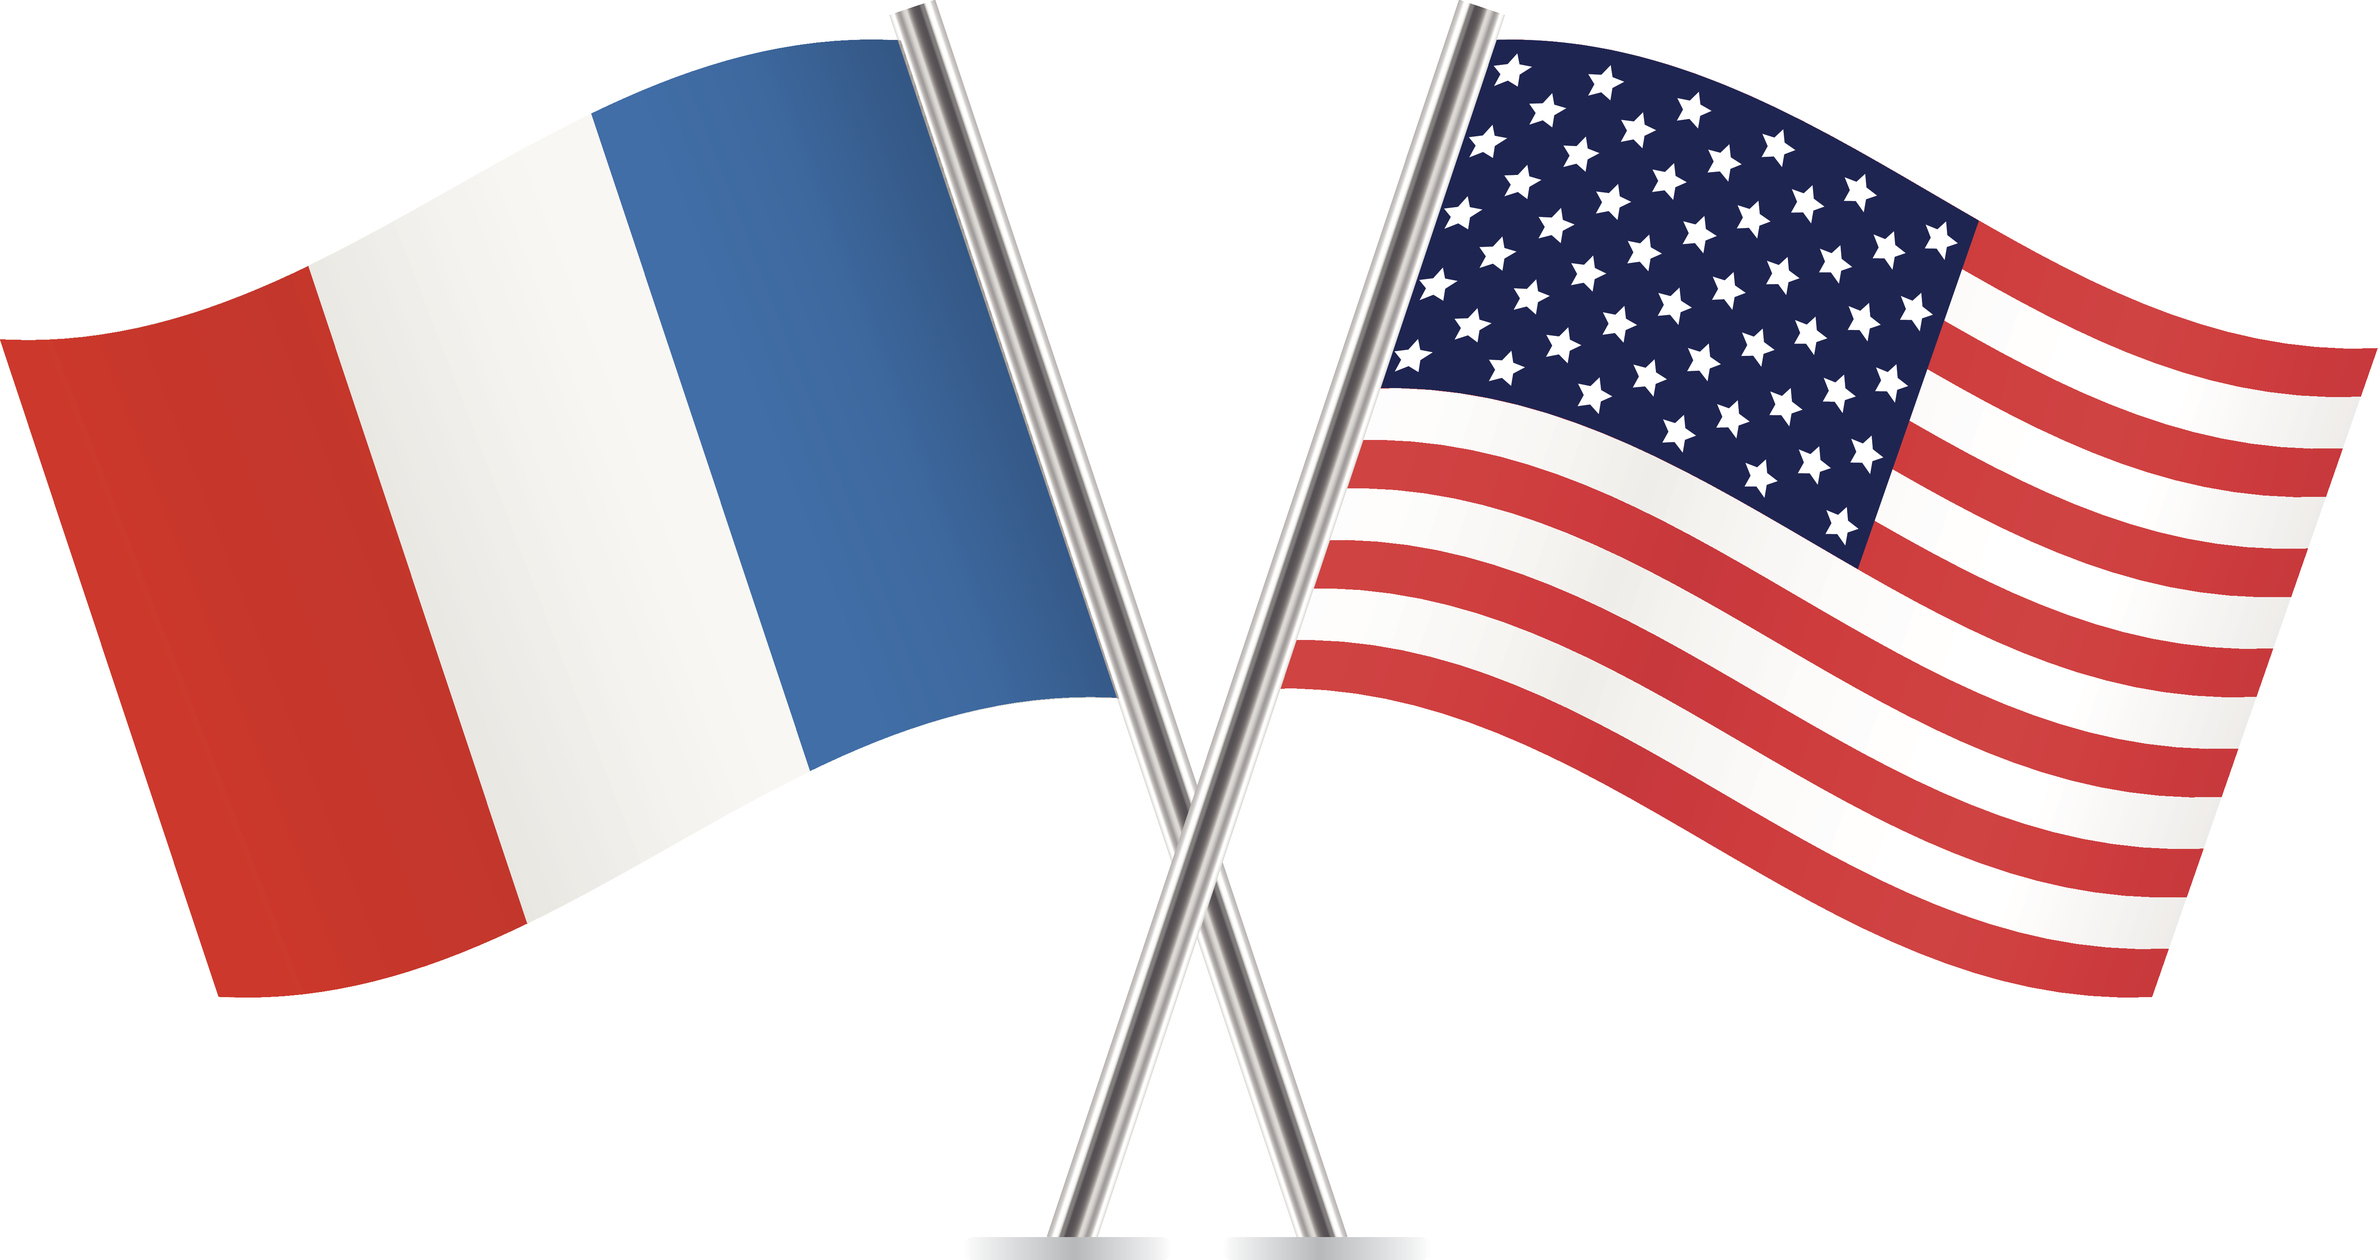 American and French flags. Vector illustration.